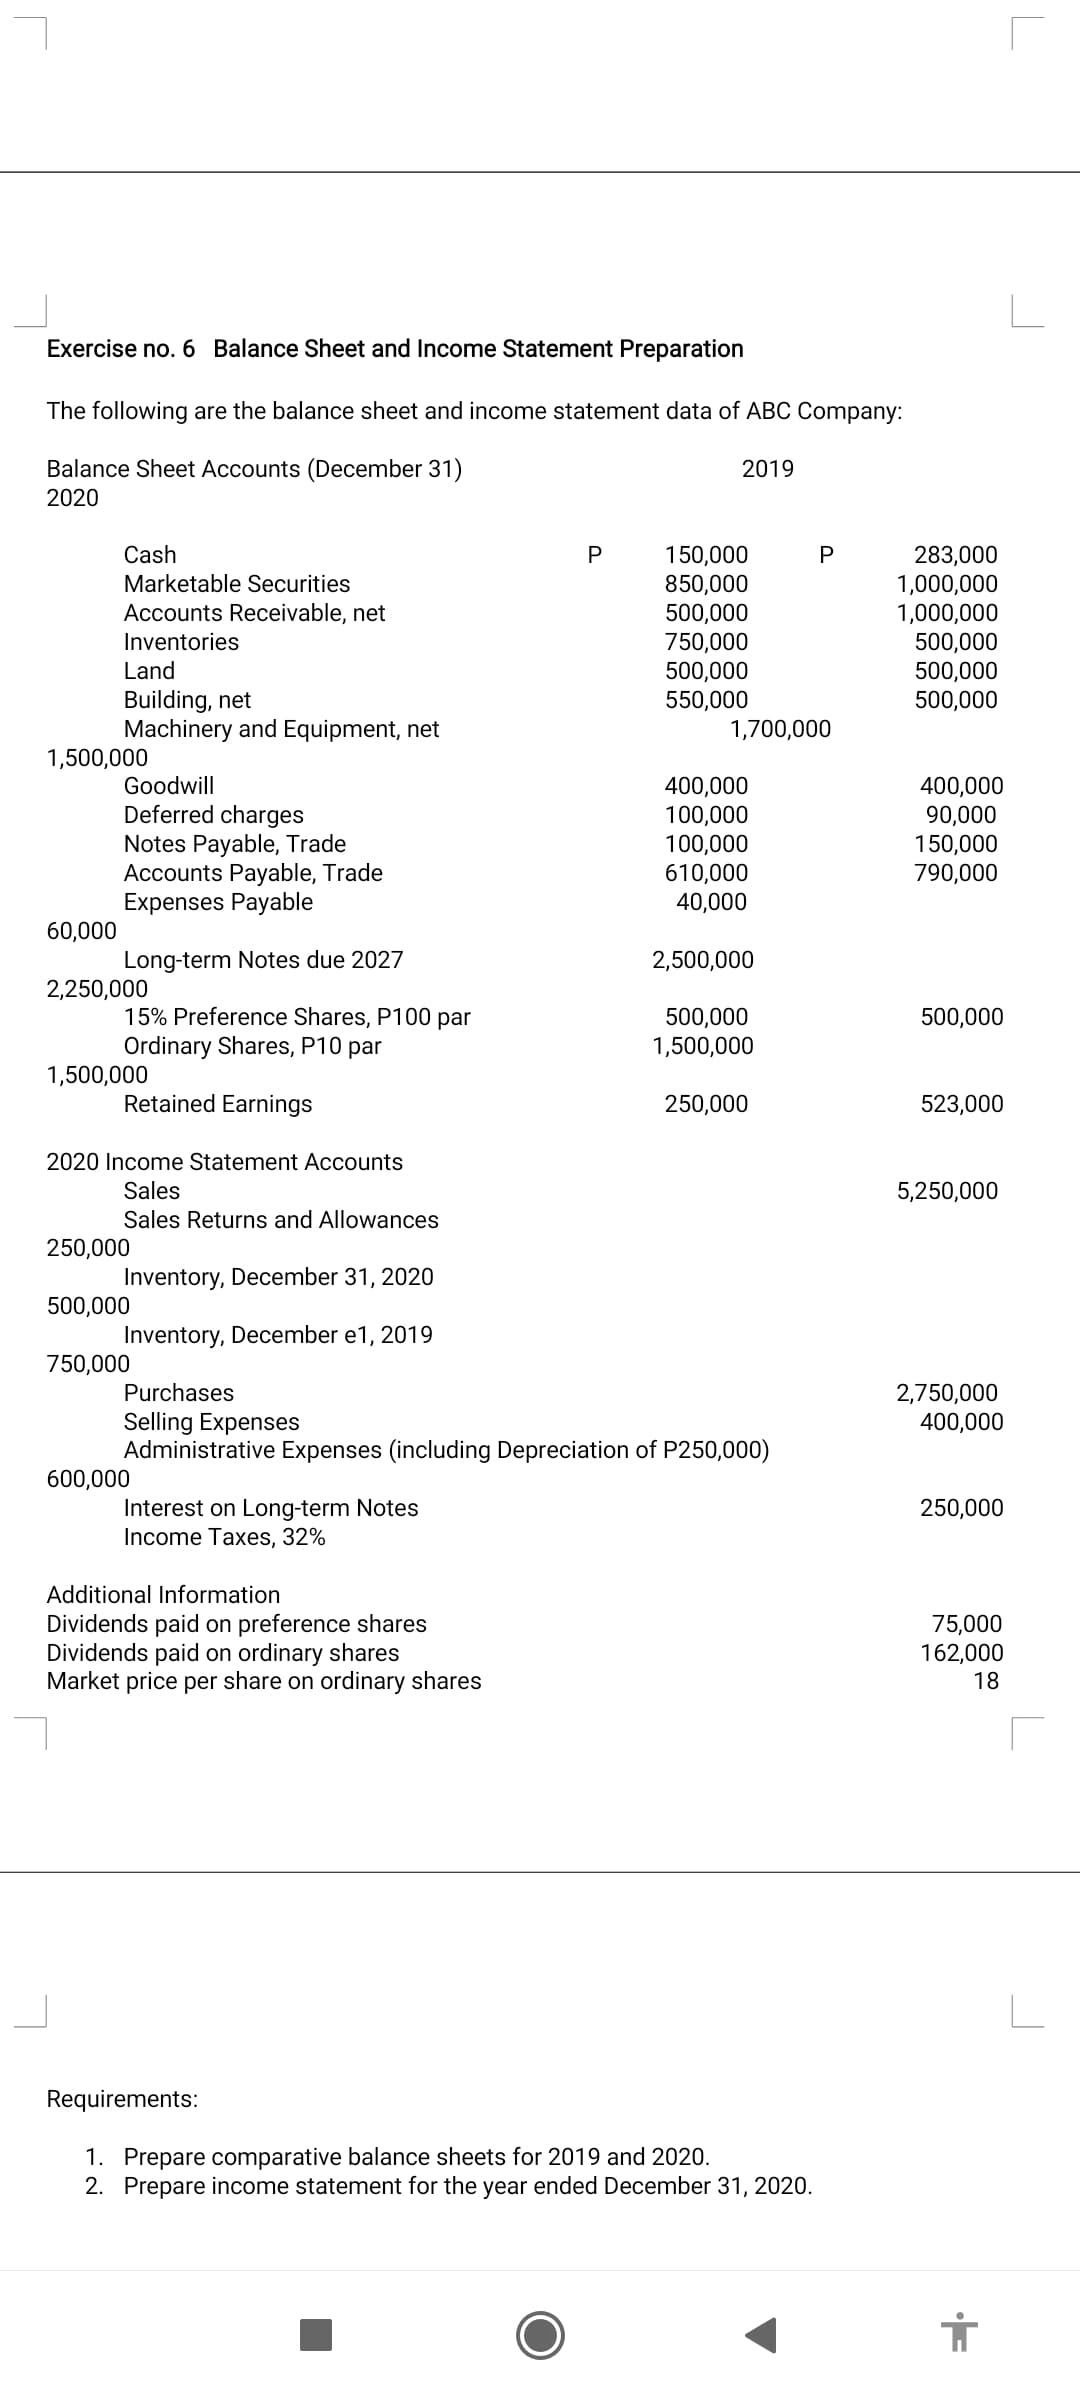 Exercise no. 6 Balance Sheet and Income Statement Preparation
The following are the balance sheet and income statement data of ABC Company:
Balance Sheet Accounts (December 31)
2019
2020
150,000
850,000
500,000
750,000
500,000
550,000
283,000
1,000,000
1,000,000
500,000
500,000
500,000
Cash
P
Marketable Securities
Accounts Receivable, net
Inventories
Land
Building, net
Machinery and Equipment, net
1,700,000
1,500,000
Goodwill
Deferred charges
Notes Payable, Trade
Accounts Pay
Expenses Payable
400,000
100,000
100,000
610,000
40,000
400,000
90,000
150,000
790,000
Trade
60,000
Long-term Notes due 2027
2,500,000
2,250,000
15% Preference Shares, P100 par
Ordinary Shares, P10 par
500,000
1,500,000
500,000
1,500,000
Retained Earnings
250,000
523,000
2020 Income Statement Accounts
Sales
5,250,000
Sales Returns and Allowances
250,000
Inventory, December 31, 2020
500,000
Inventory, December e1, 2019
750,000
Purchases
2,750,000
400,000
Selling Expenses
Administrative Expenses (including Depreciation of P250,000)
600,000
Interest on Long-term Notes
Income Taxes, 32%
250,000
Additional Information
Dividends paid on preference shares
Dividends paid on ordinary shares
Market price per share on ordinary shares
75,000
162,000
18
Requirements:
1. Prepare comparative balance sheets for 2019 and 2020.
2. Prepare income statement for the year ended December 31, 2020.
